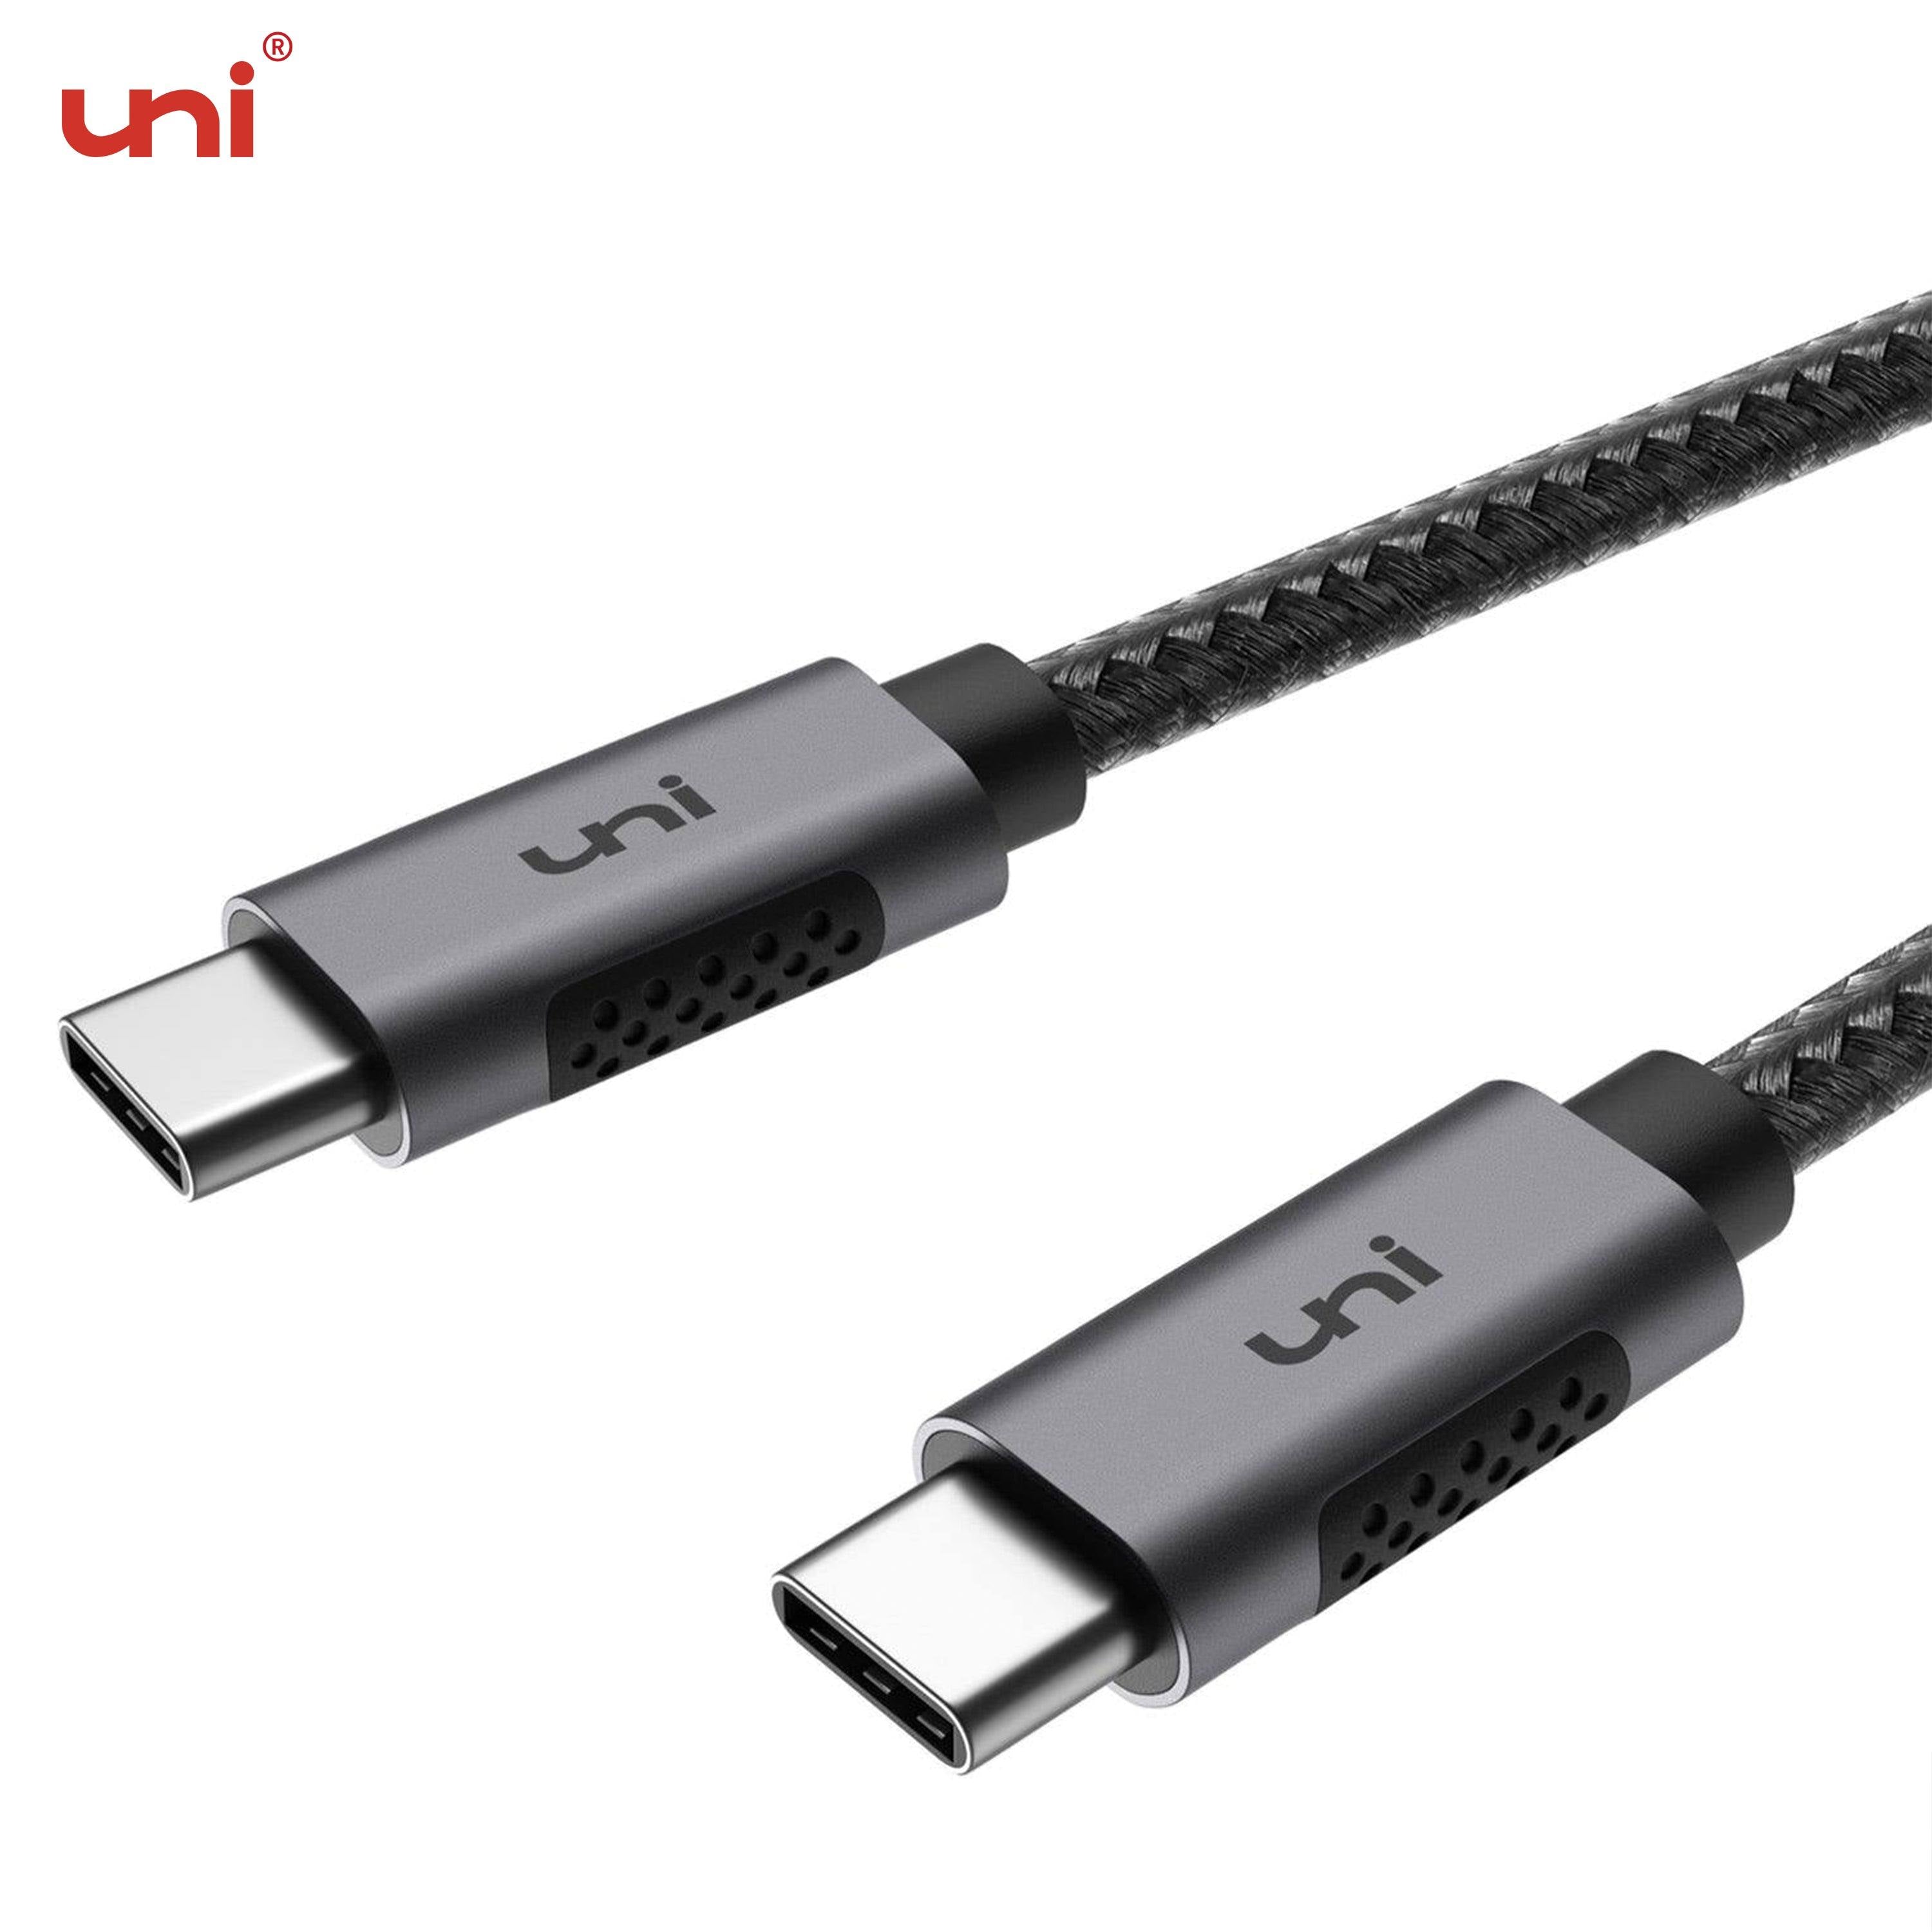 uni® C Fast Charging Cable, 100W 5A Cable, Extra Durable